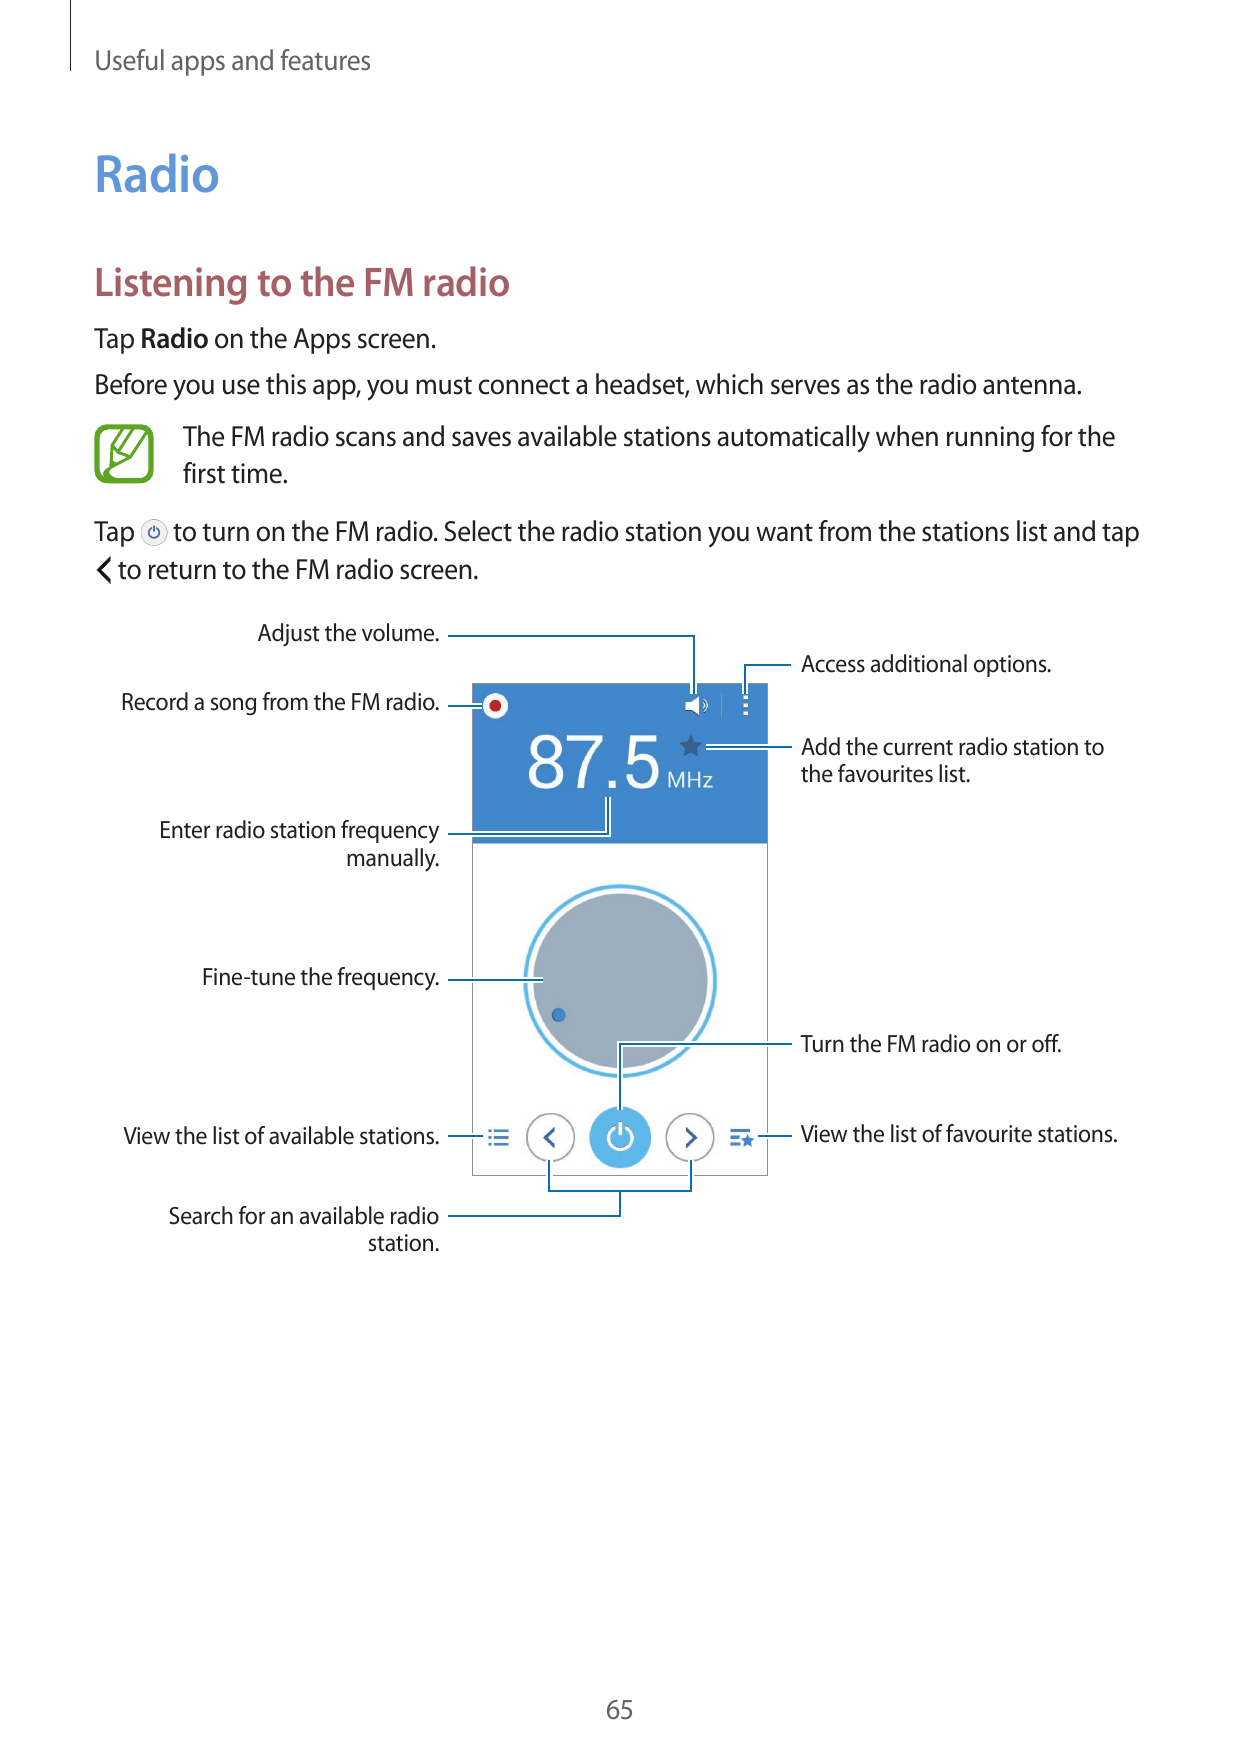 Useful apps and featuresRadioListening to the FM radioTap Radio on the Apps screen.Before you use this app, you must connect a h